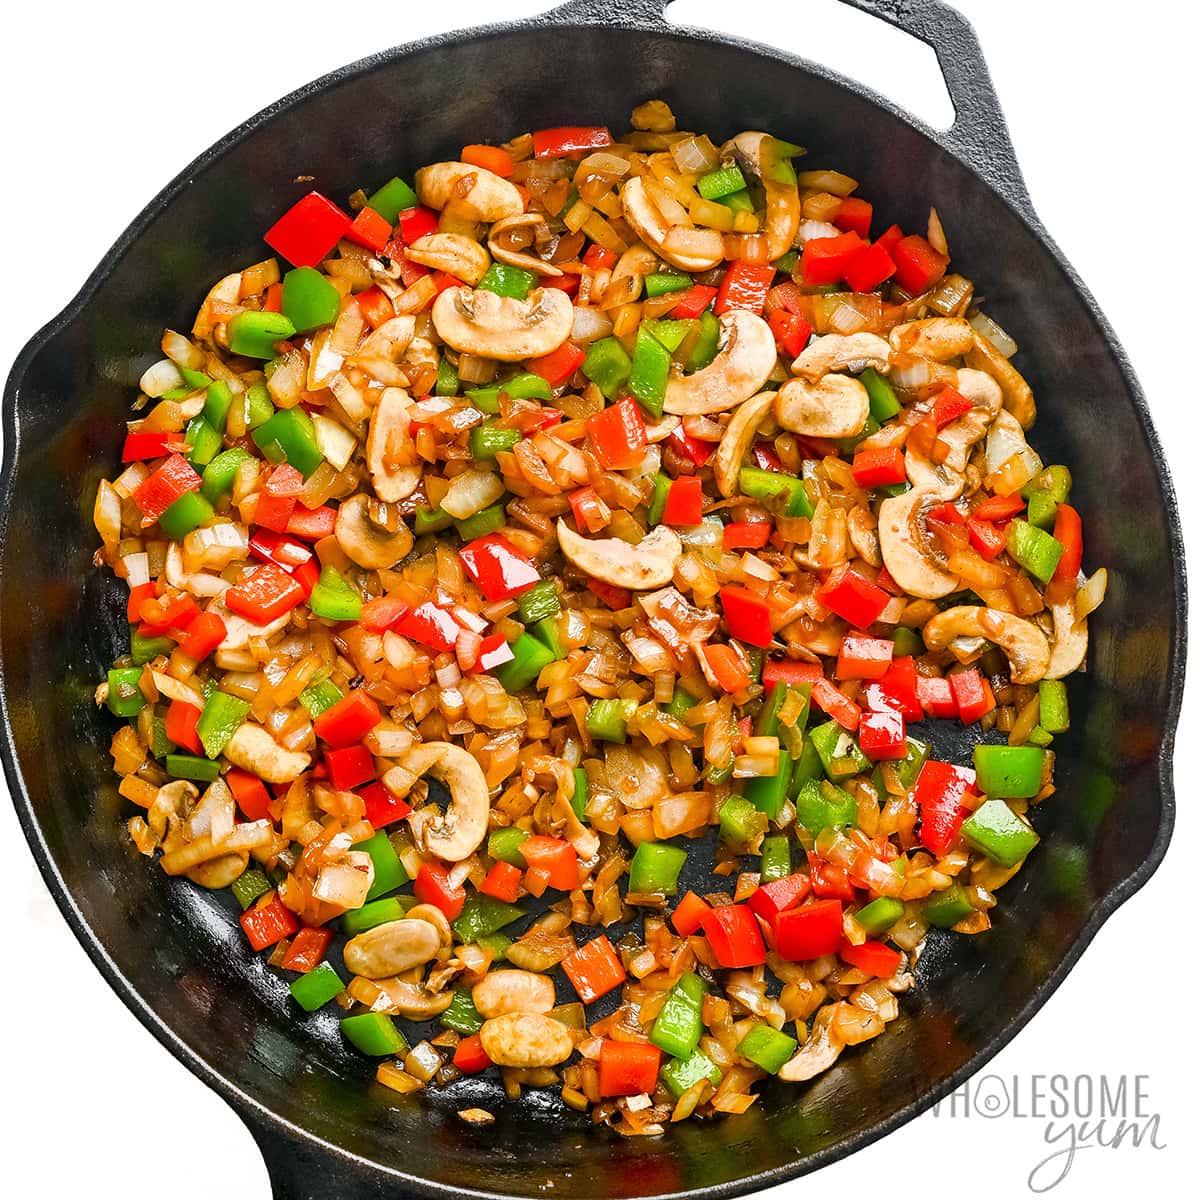 Vegetables are fried in a frying pan.